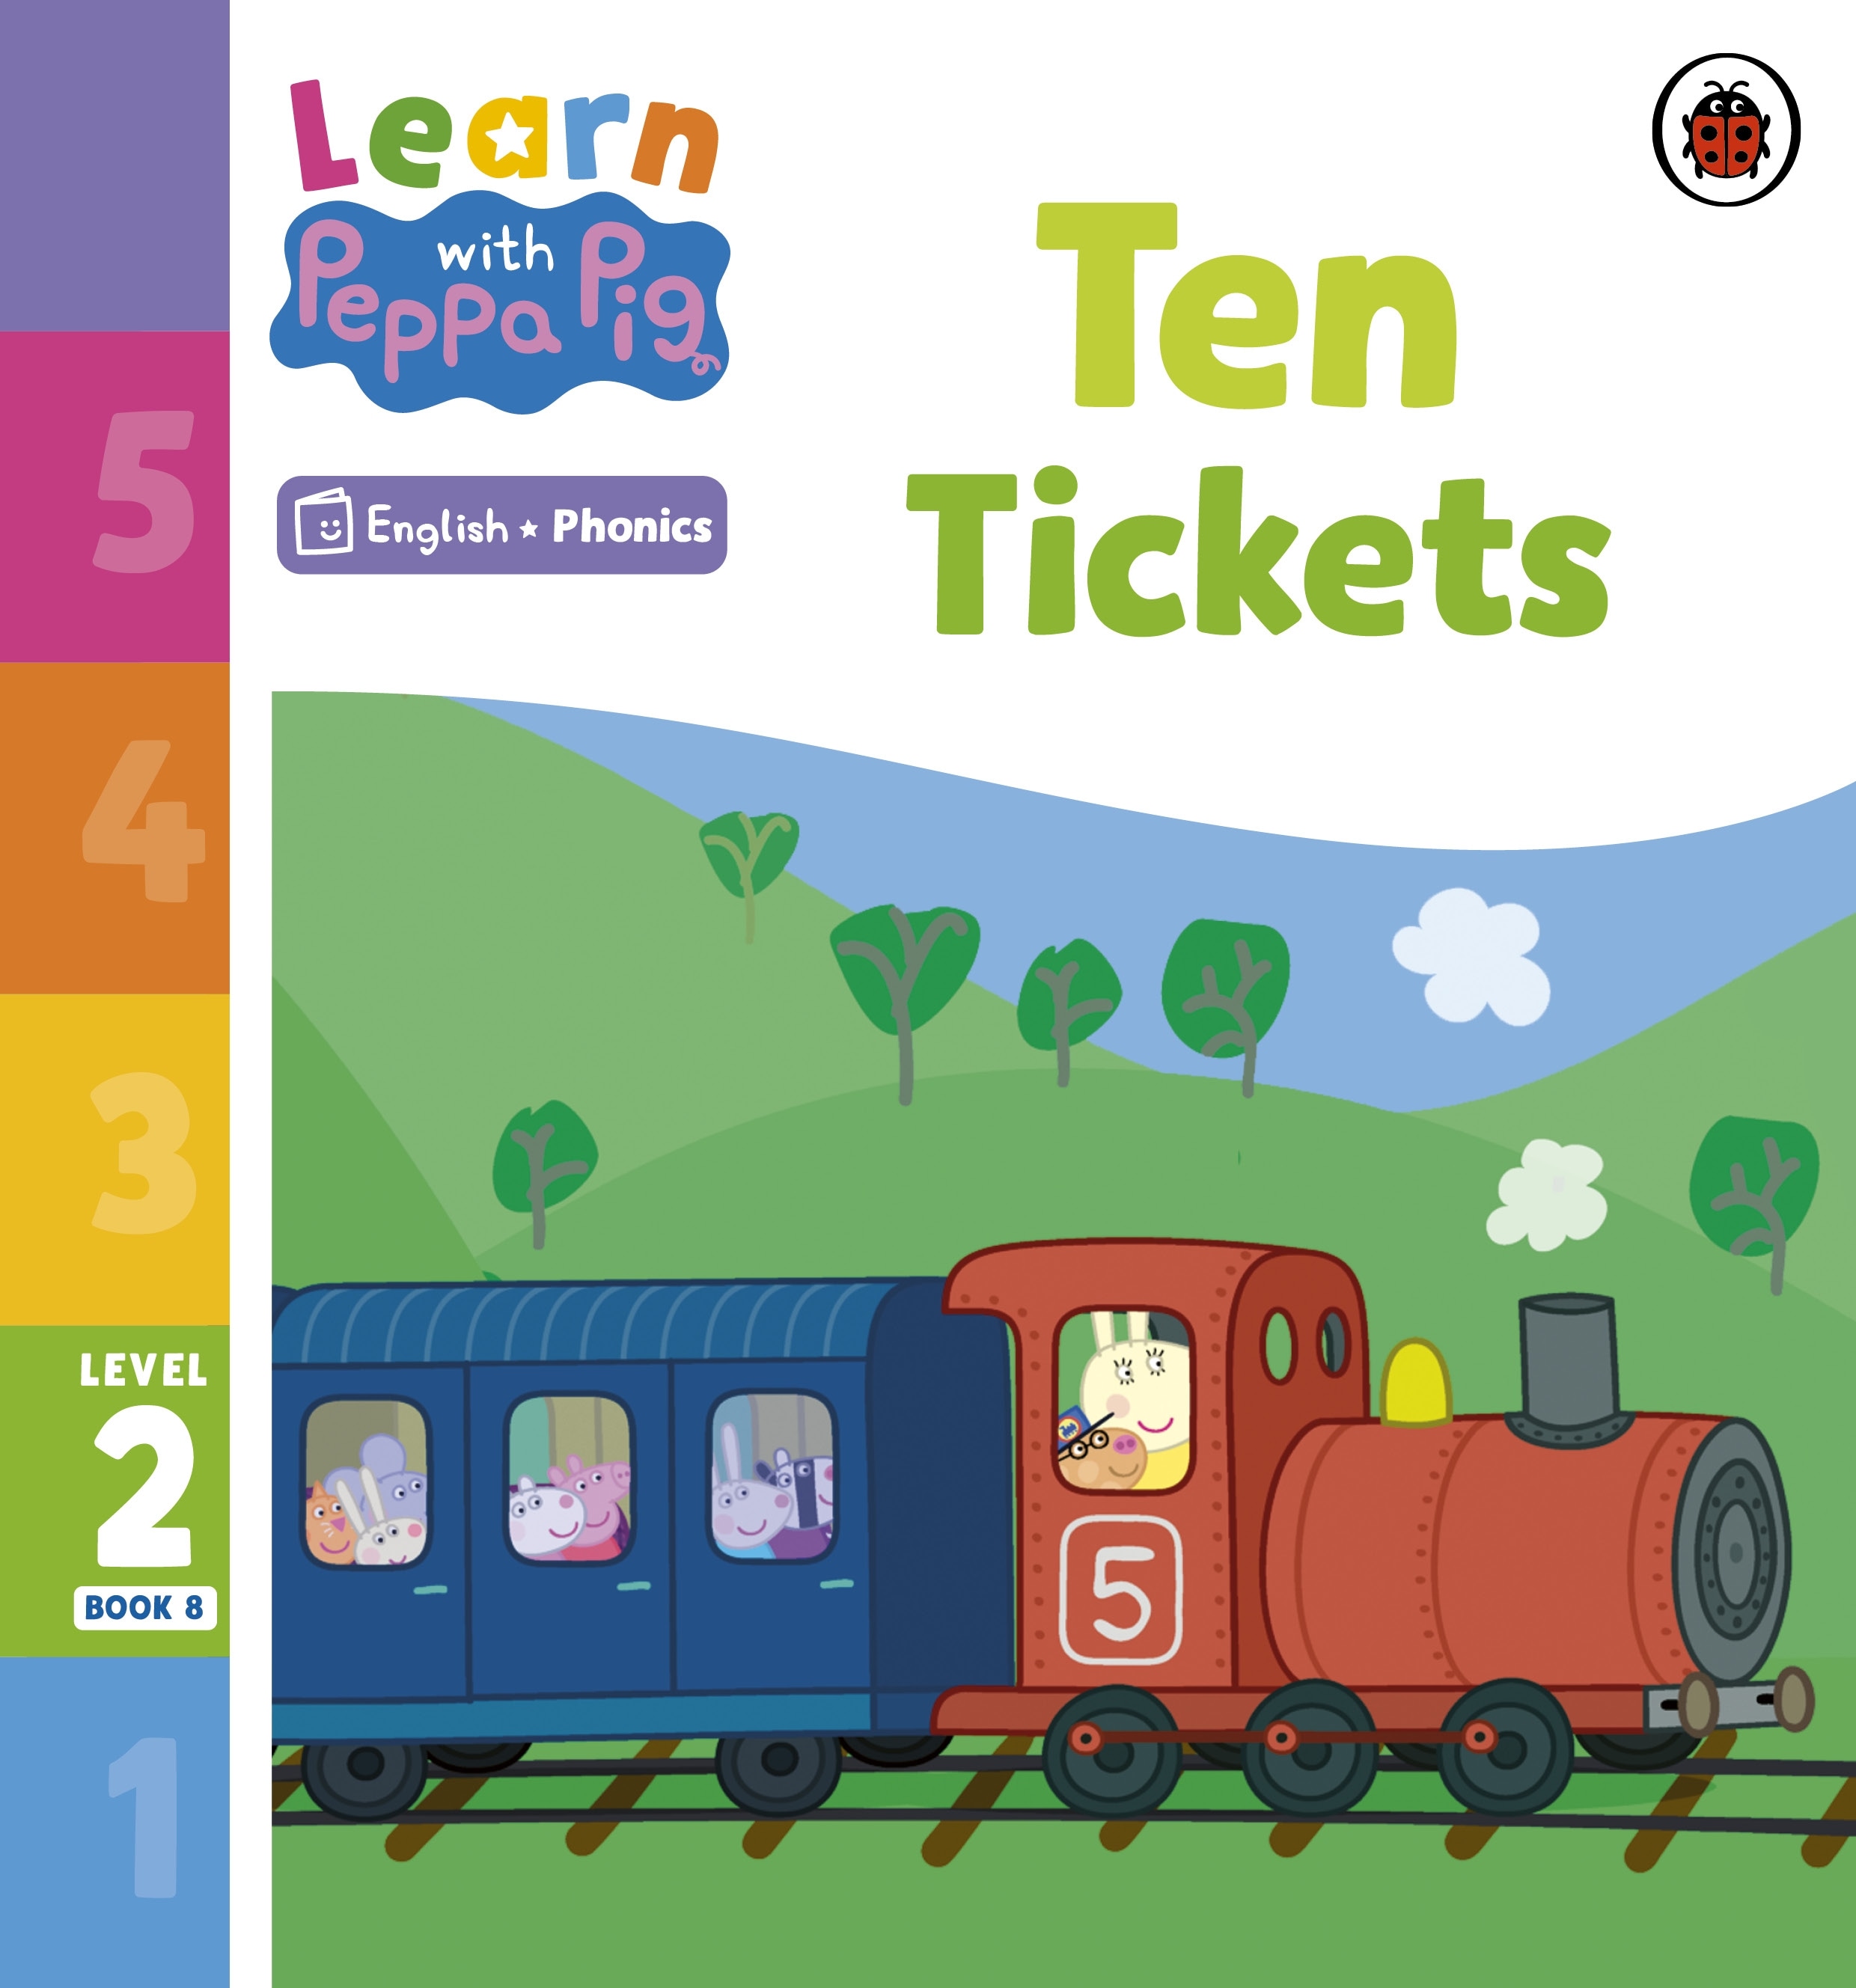 Learn with Peppa Phonics Level 2 Book 8 — Ten Tickets (Phonics Reader)